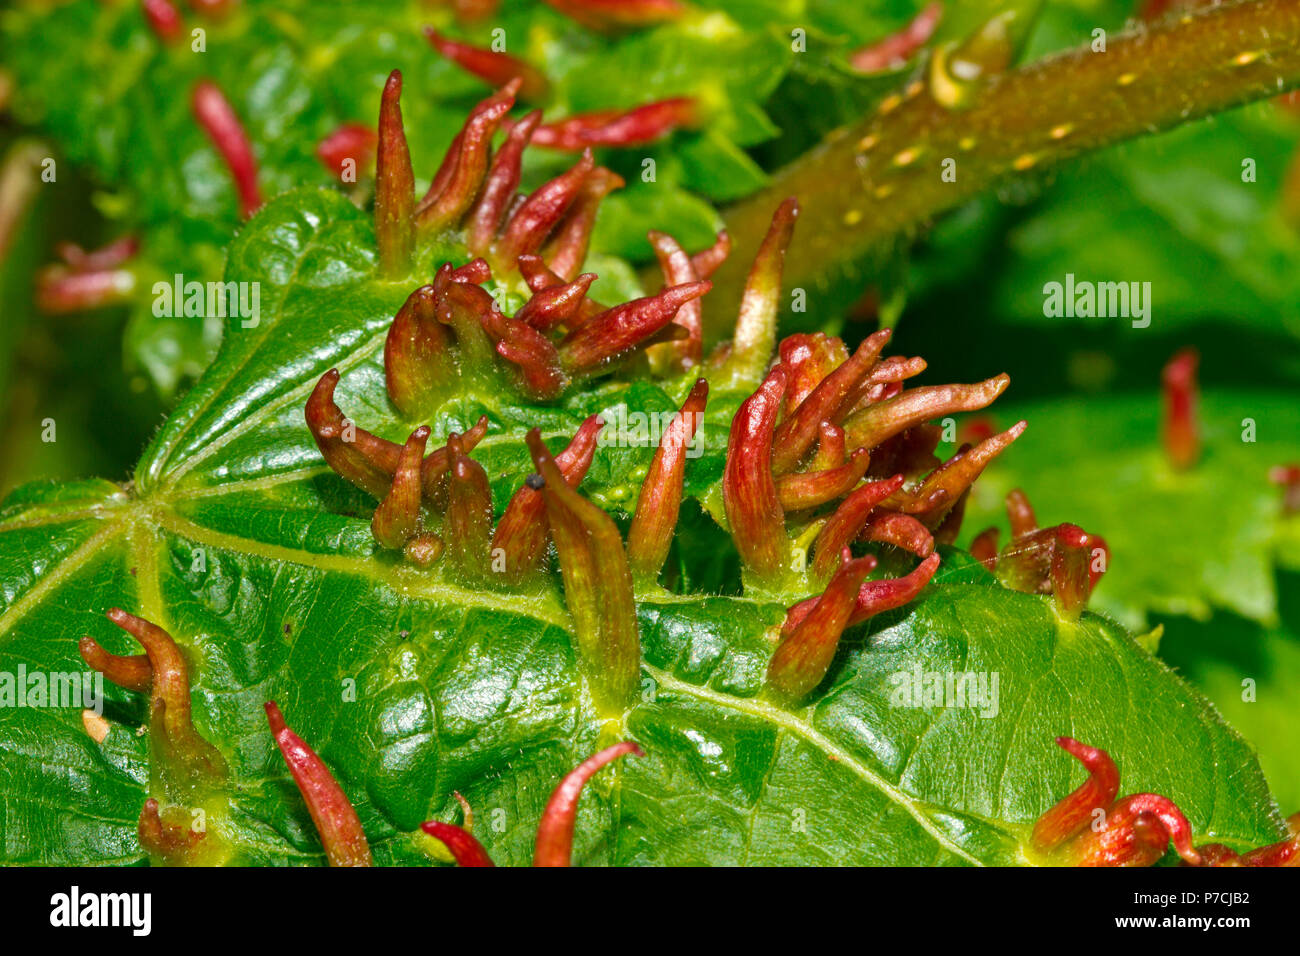 lime nail gal, (Eriophyes tiliae) Stock Photo